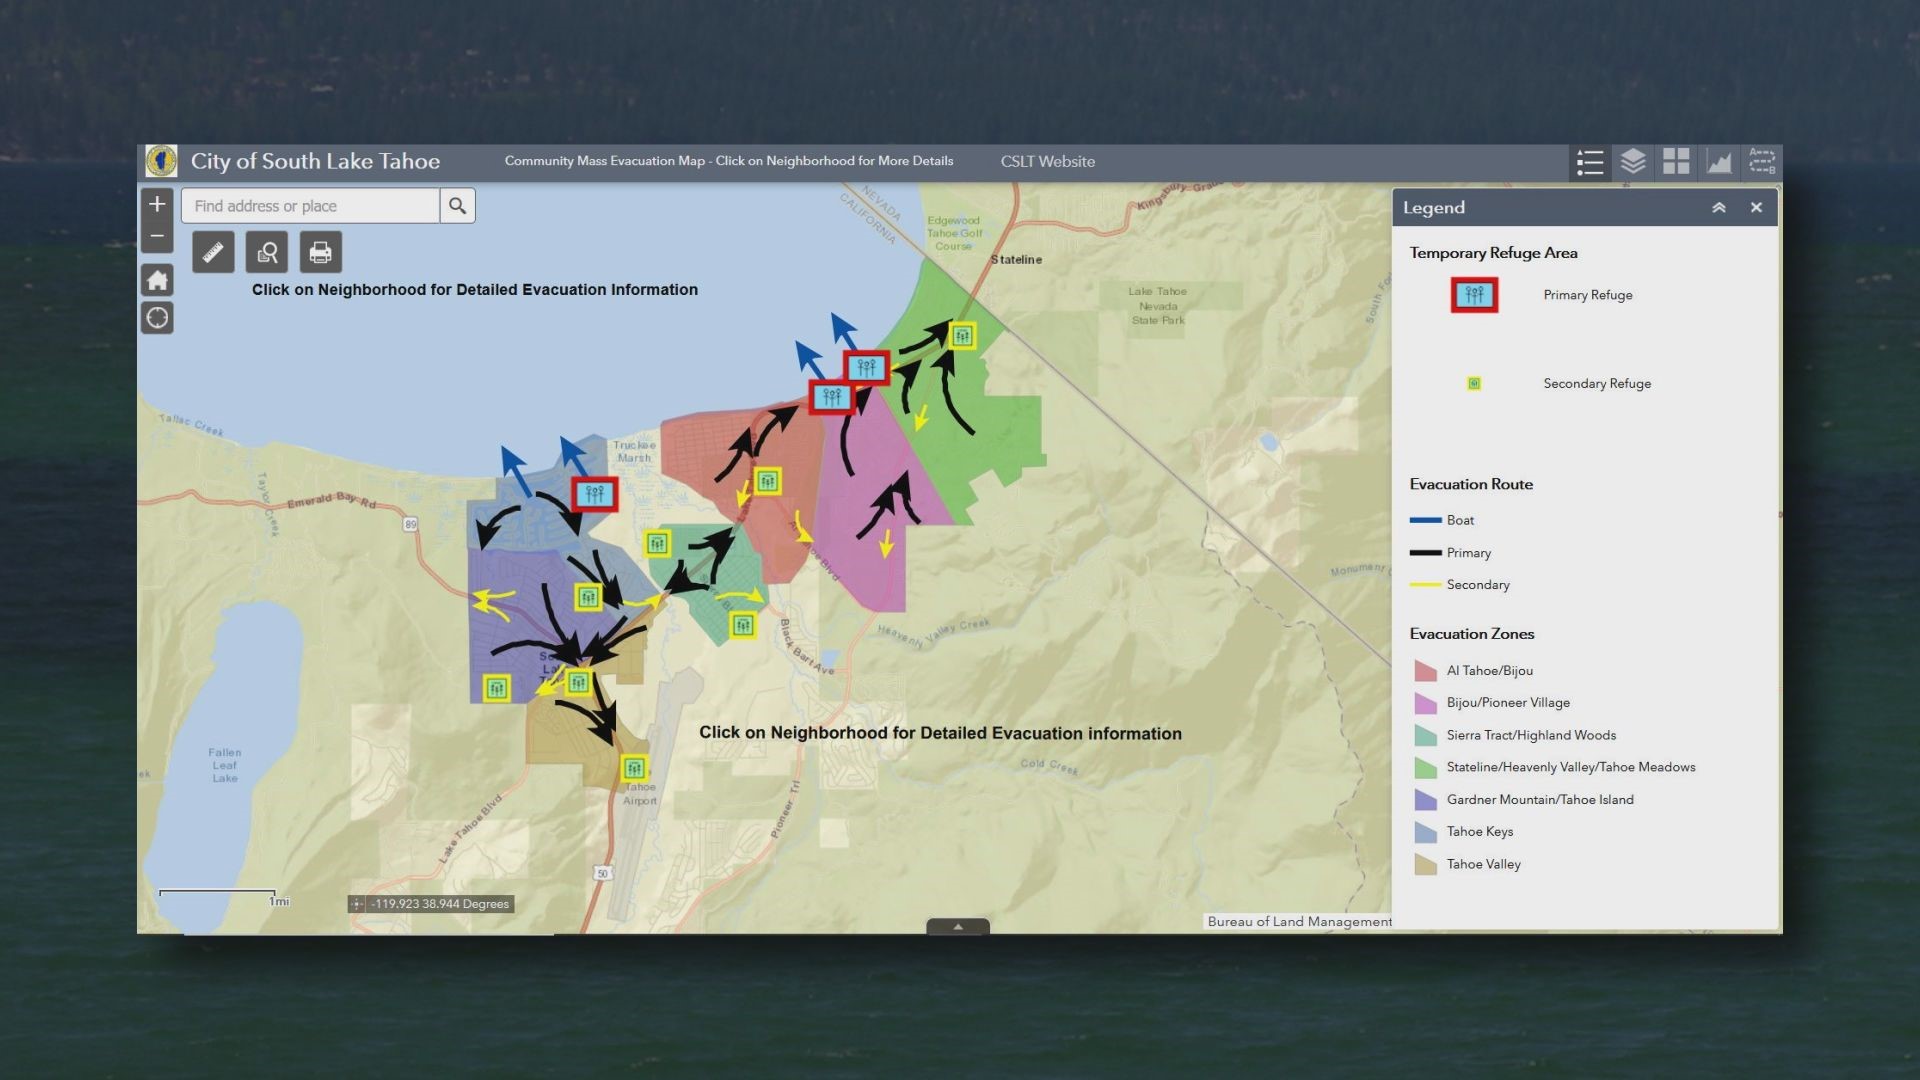 With serious concerns for potential wildfires in the region, South Lake Tahoe city officials are taking a proactive approach to help residents prepare for the worst. The city has launched an interactive map to help direct people where to go during an emergency.